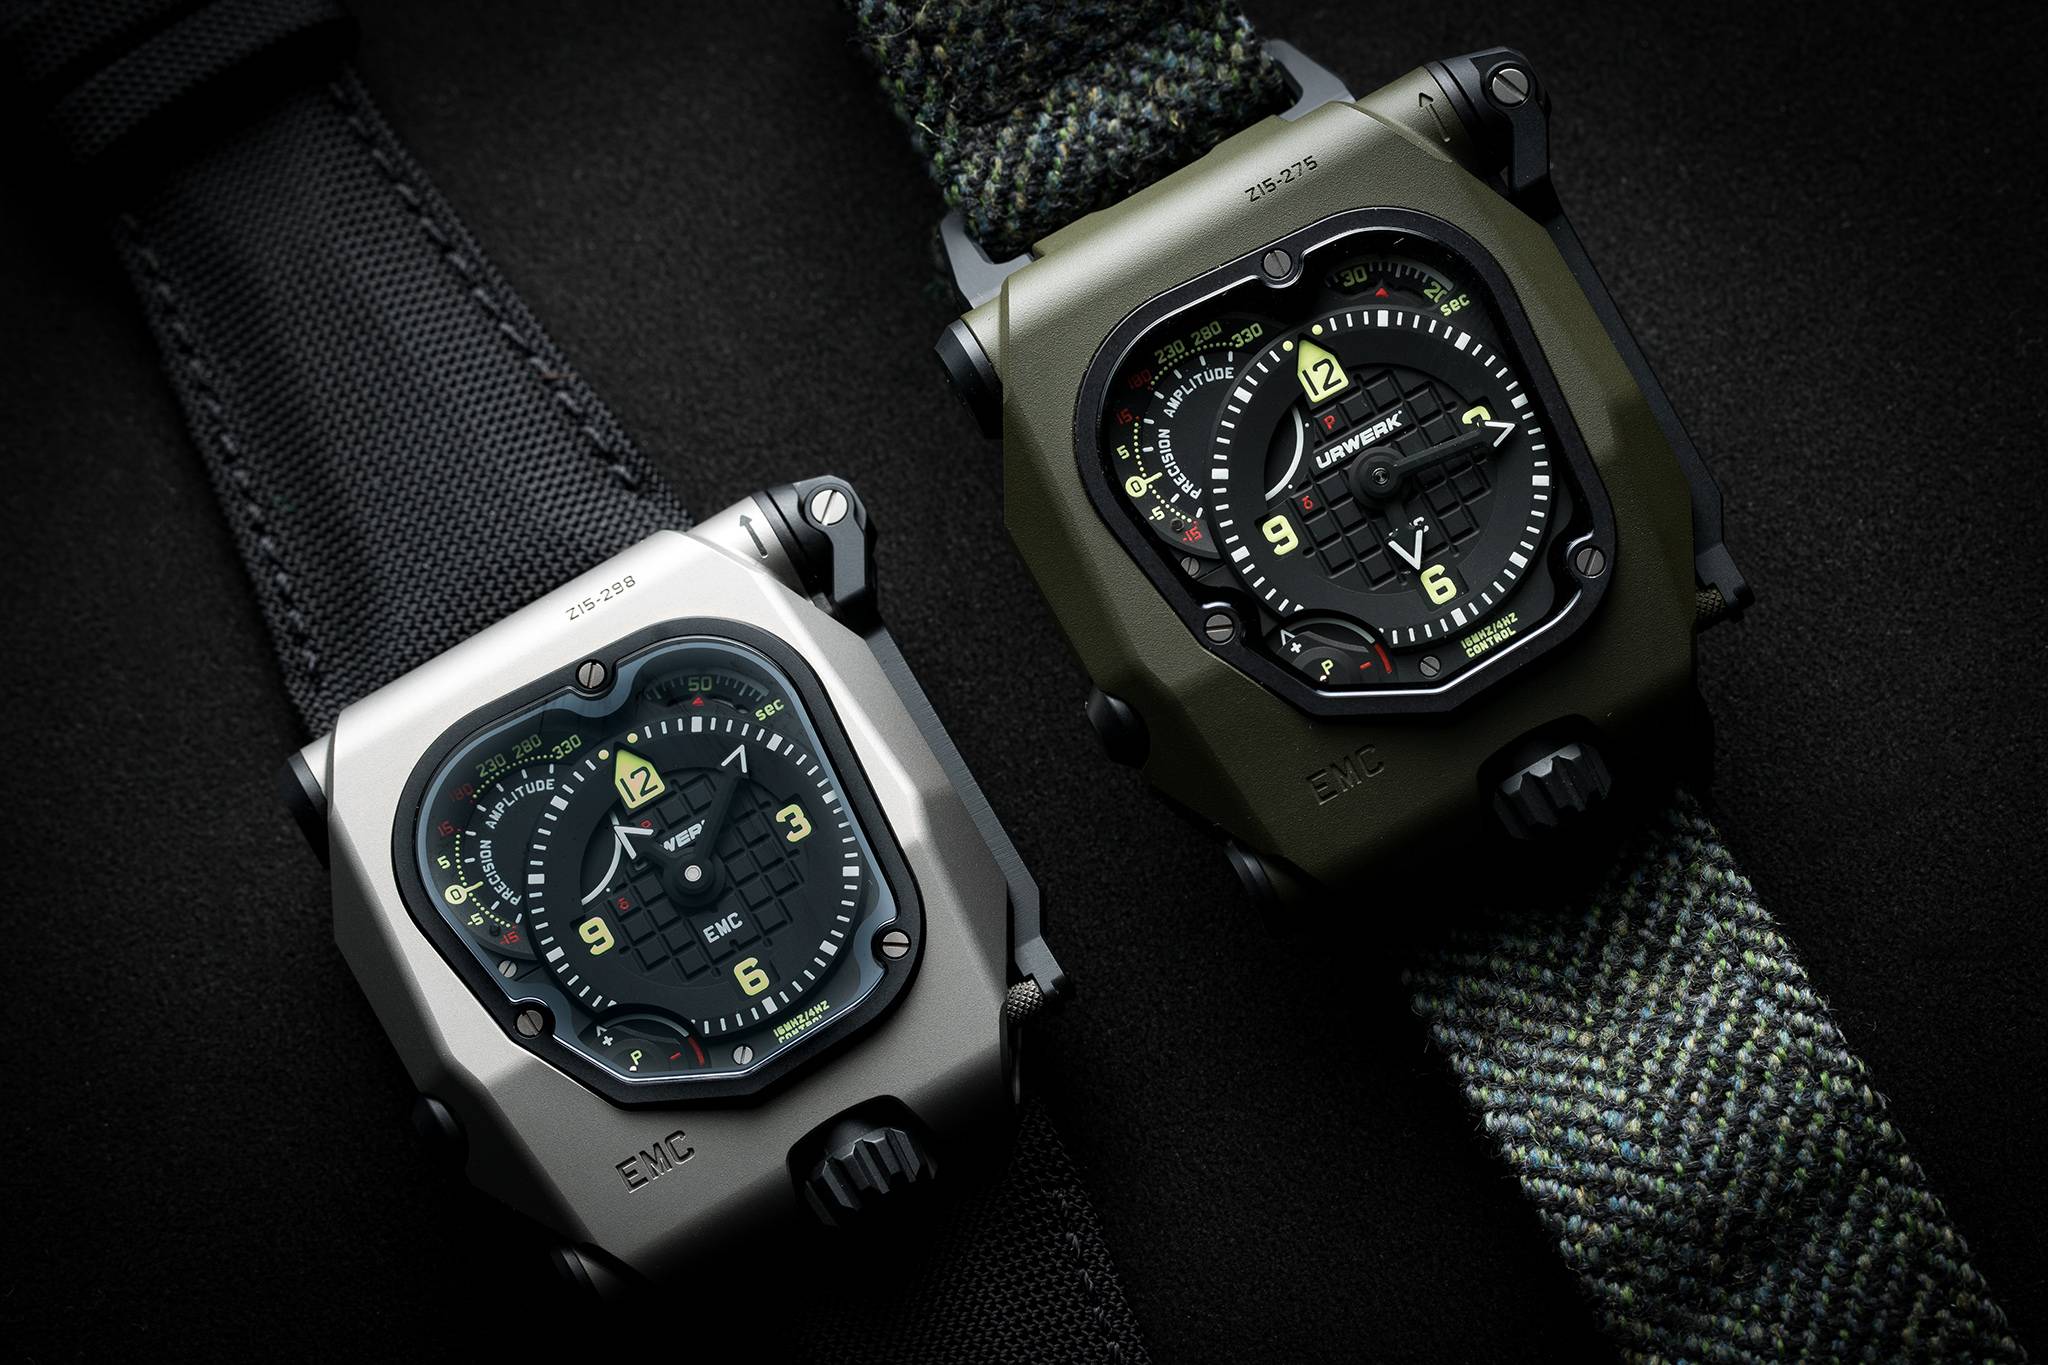 SIHH: Introducing The Urwerk UR-105 T-Rex and The EMC Time-Hunter Watches